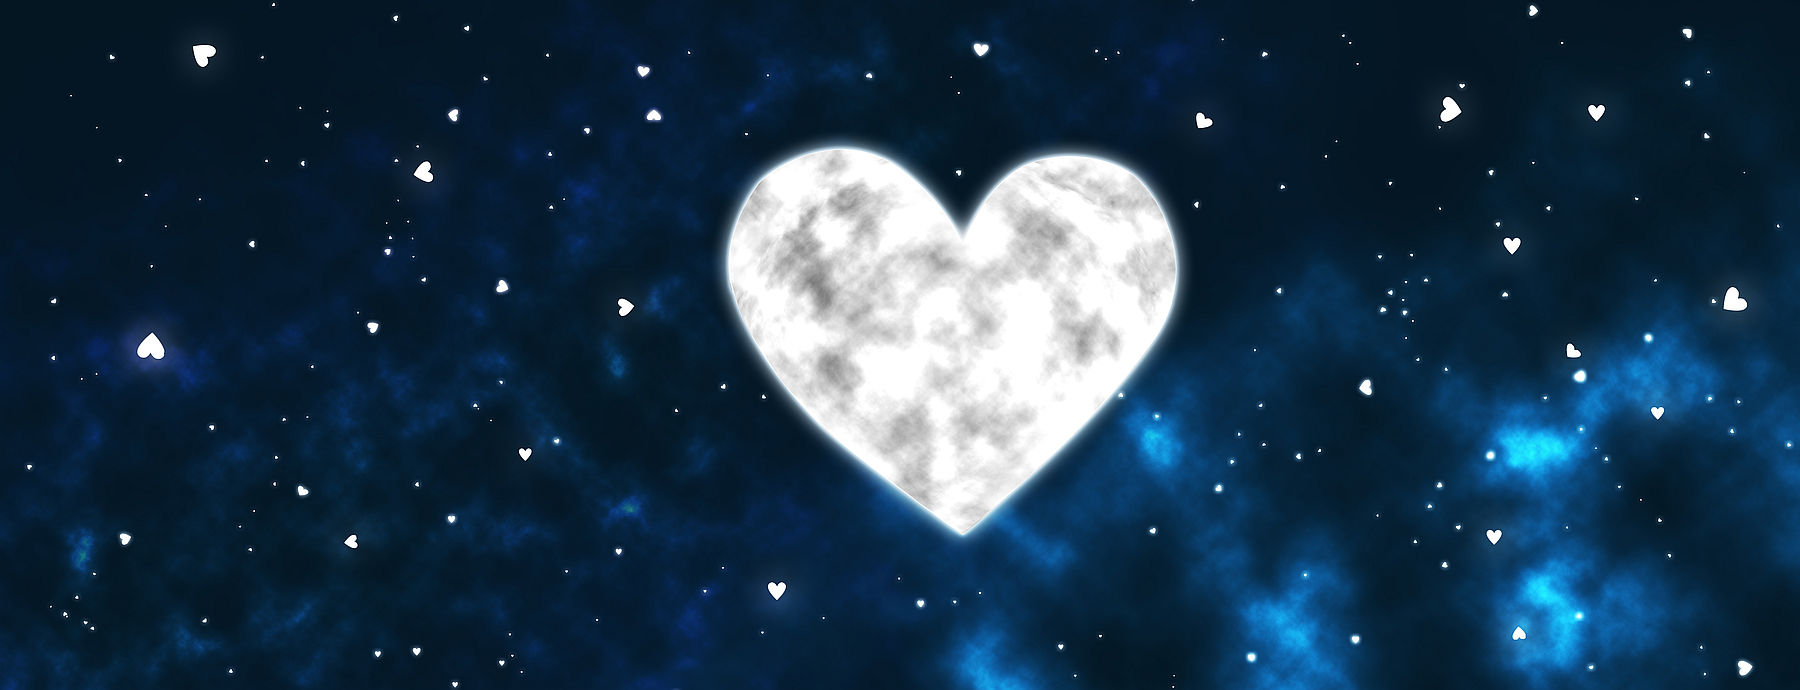 Valentine Moon in a sky of stars (Image)